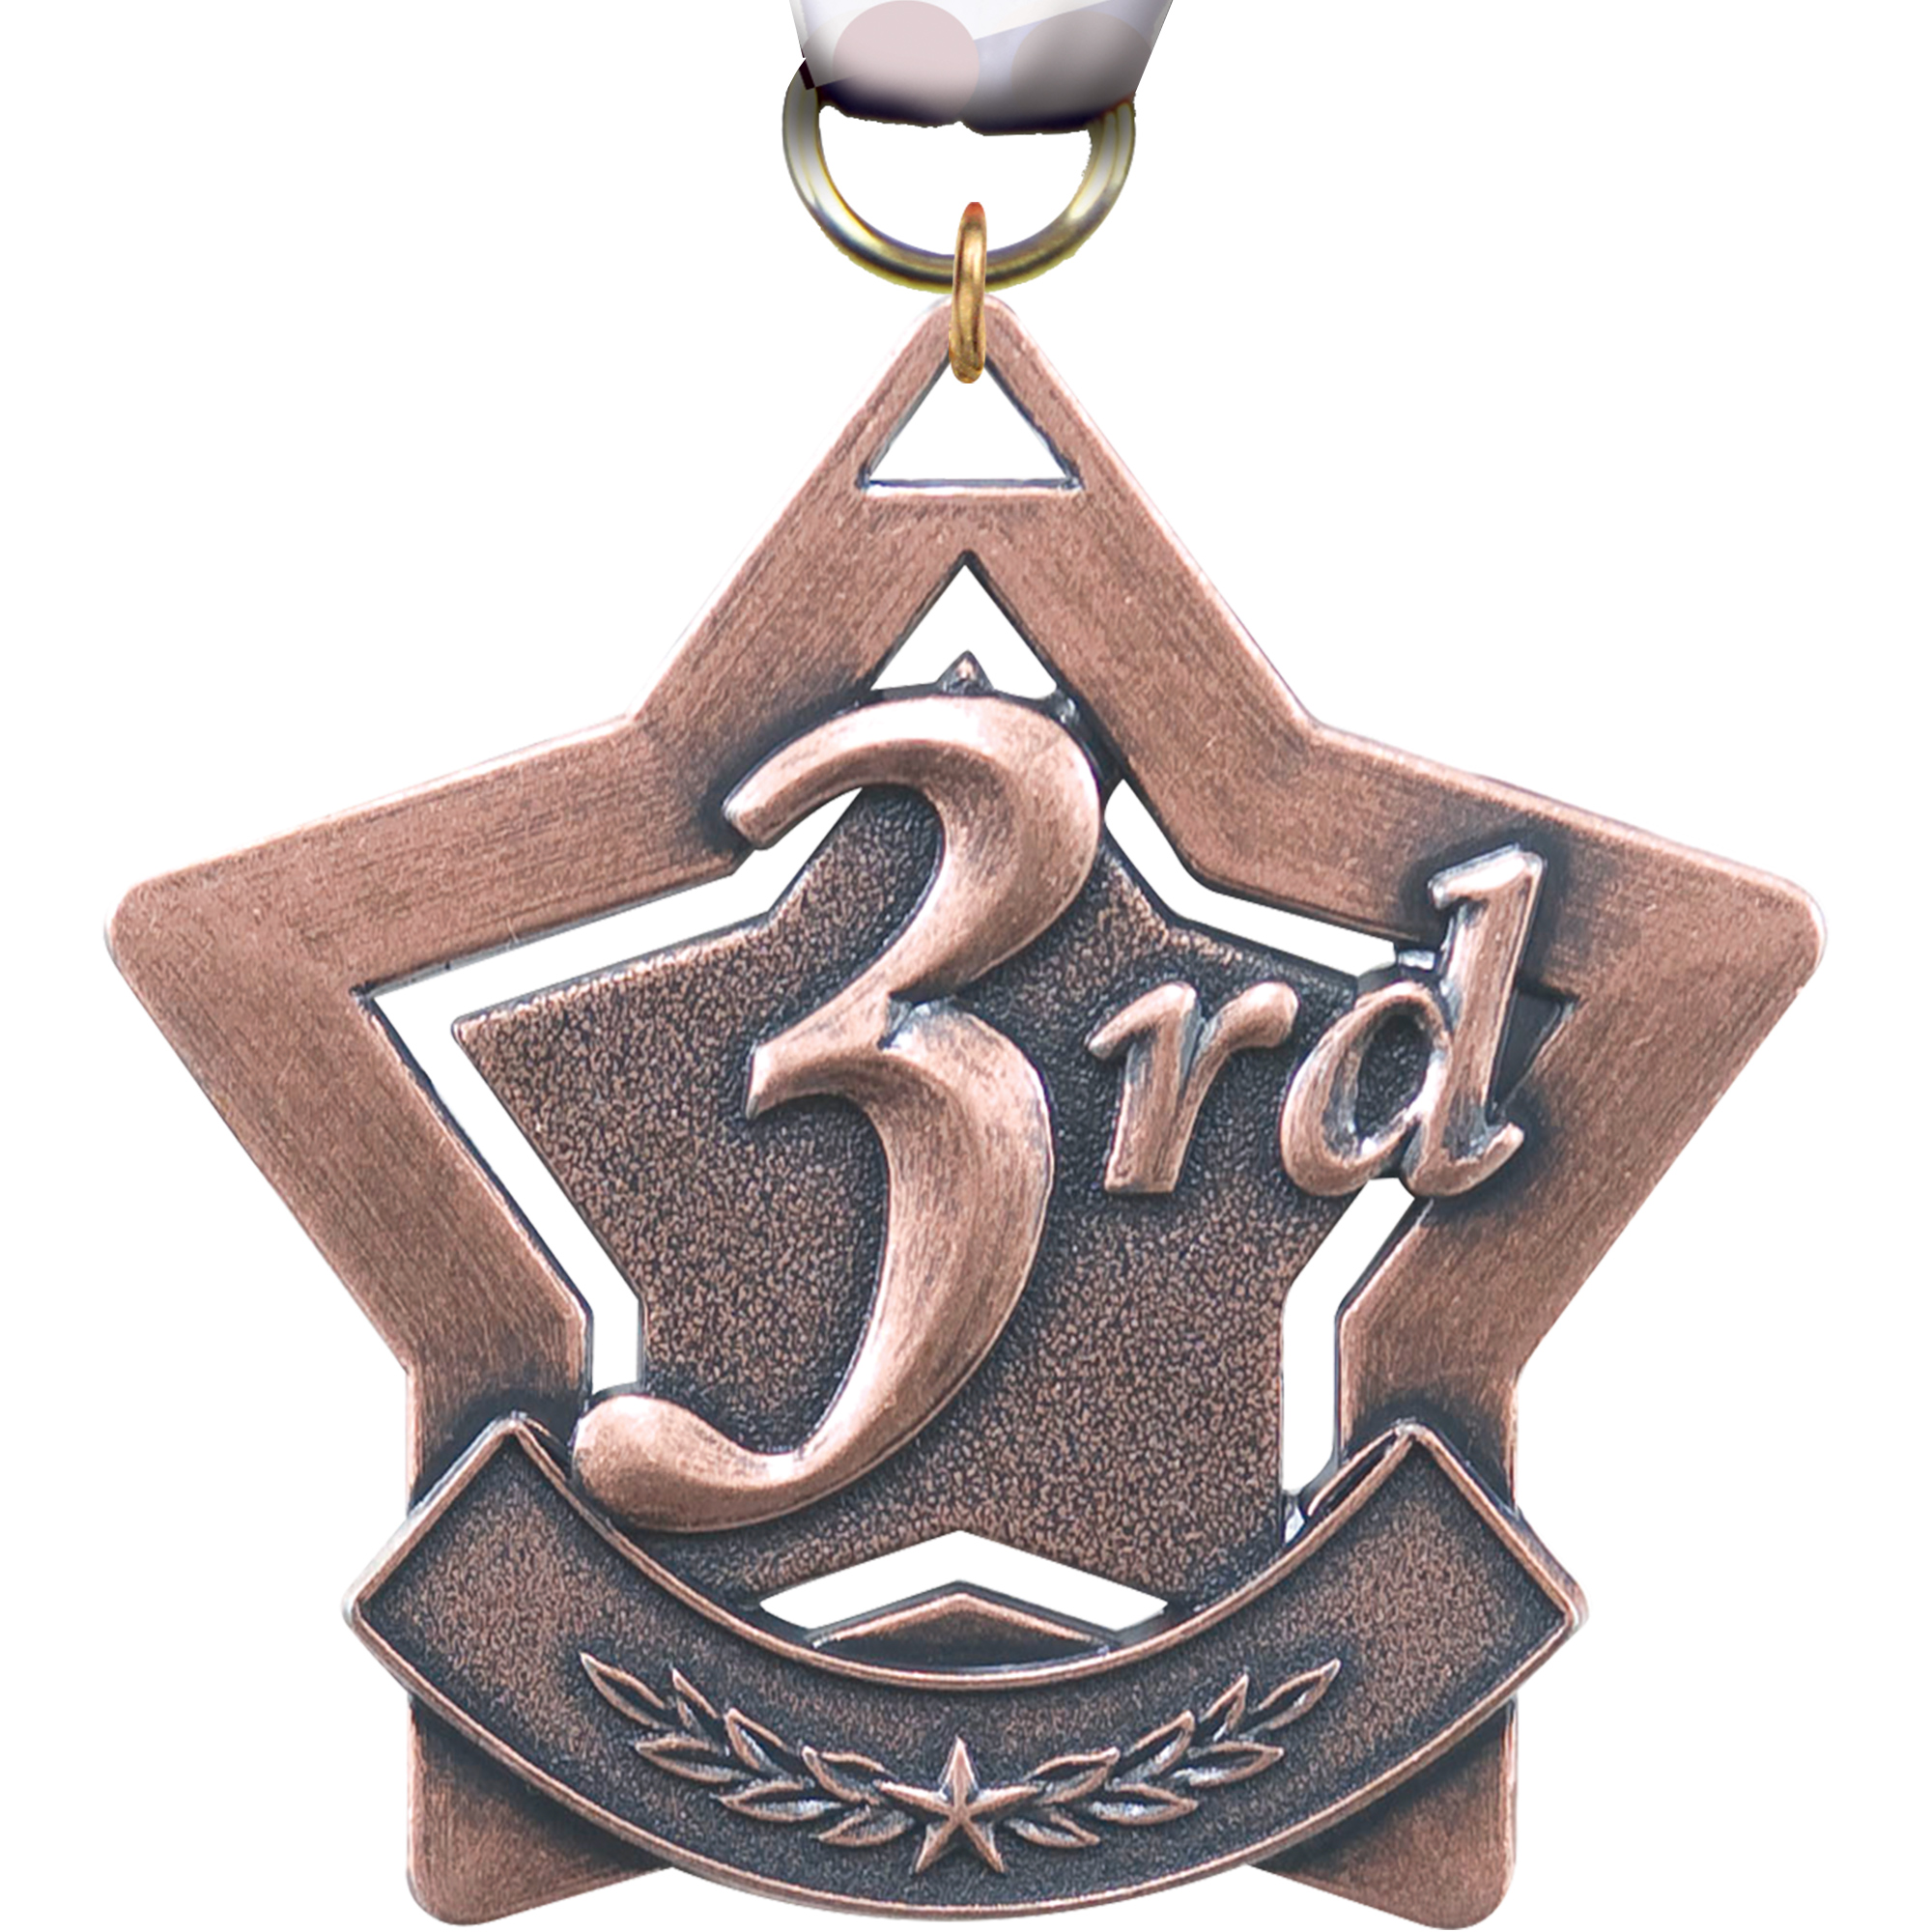 3rd Place Star Medal